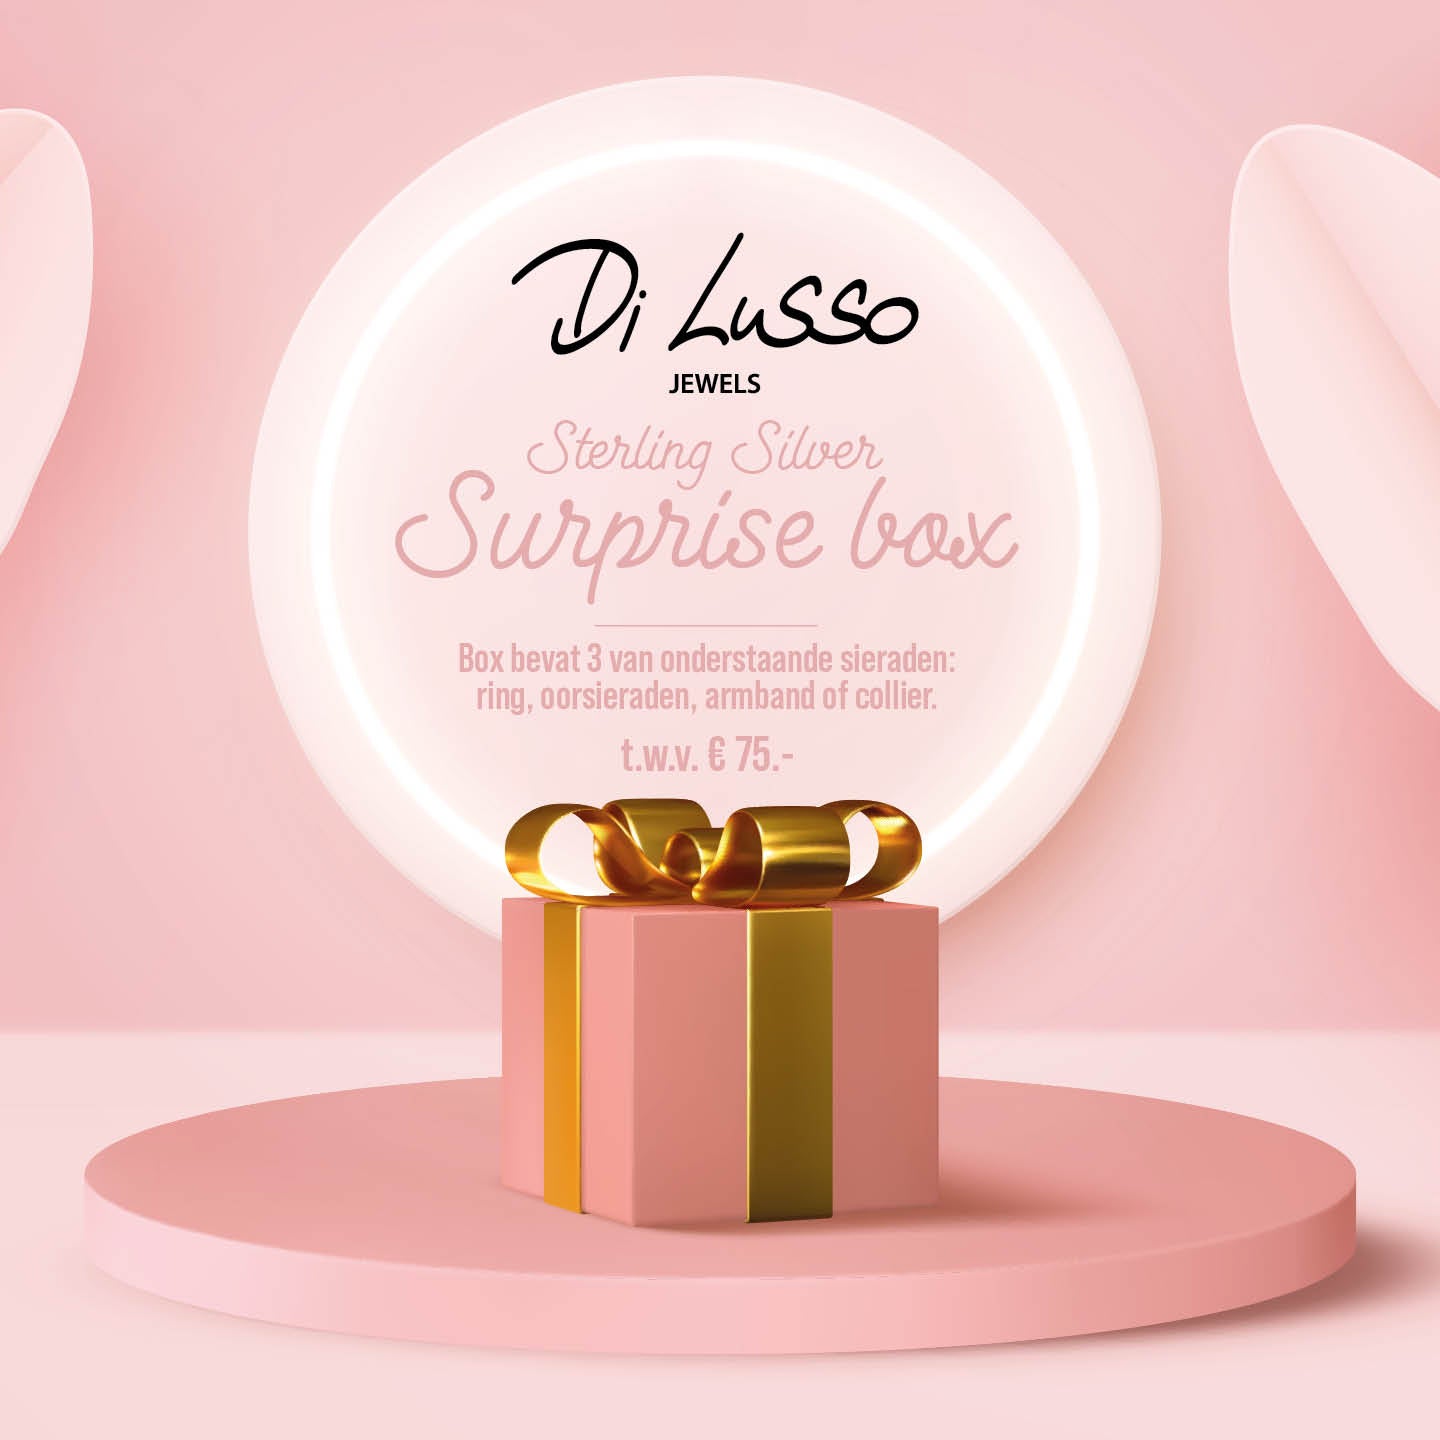 Dilusso Surprise Box: The Custom Curated 'Luxury Surprise Box' For